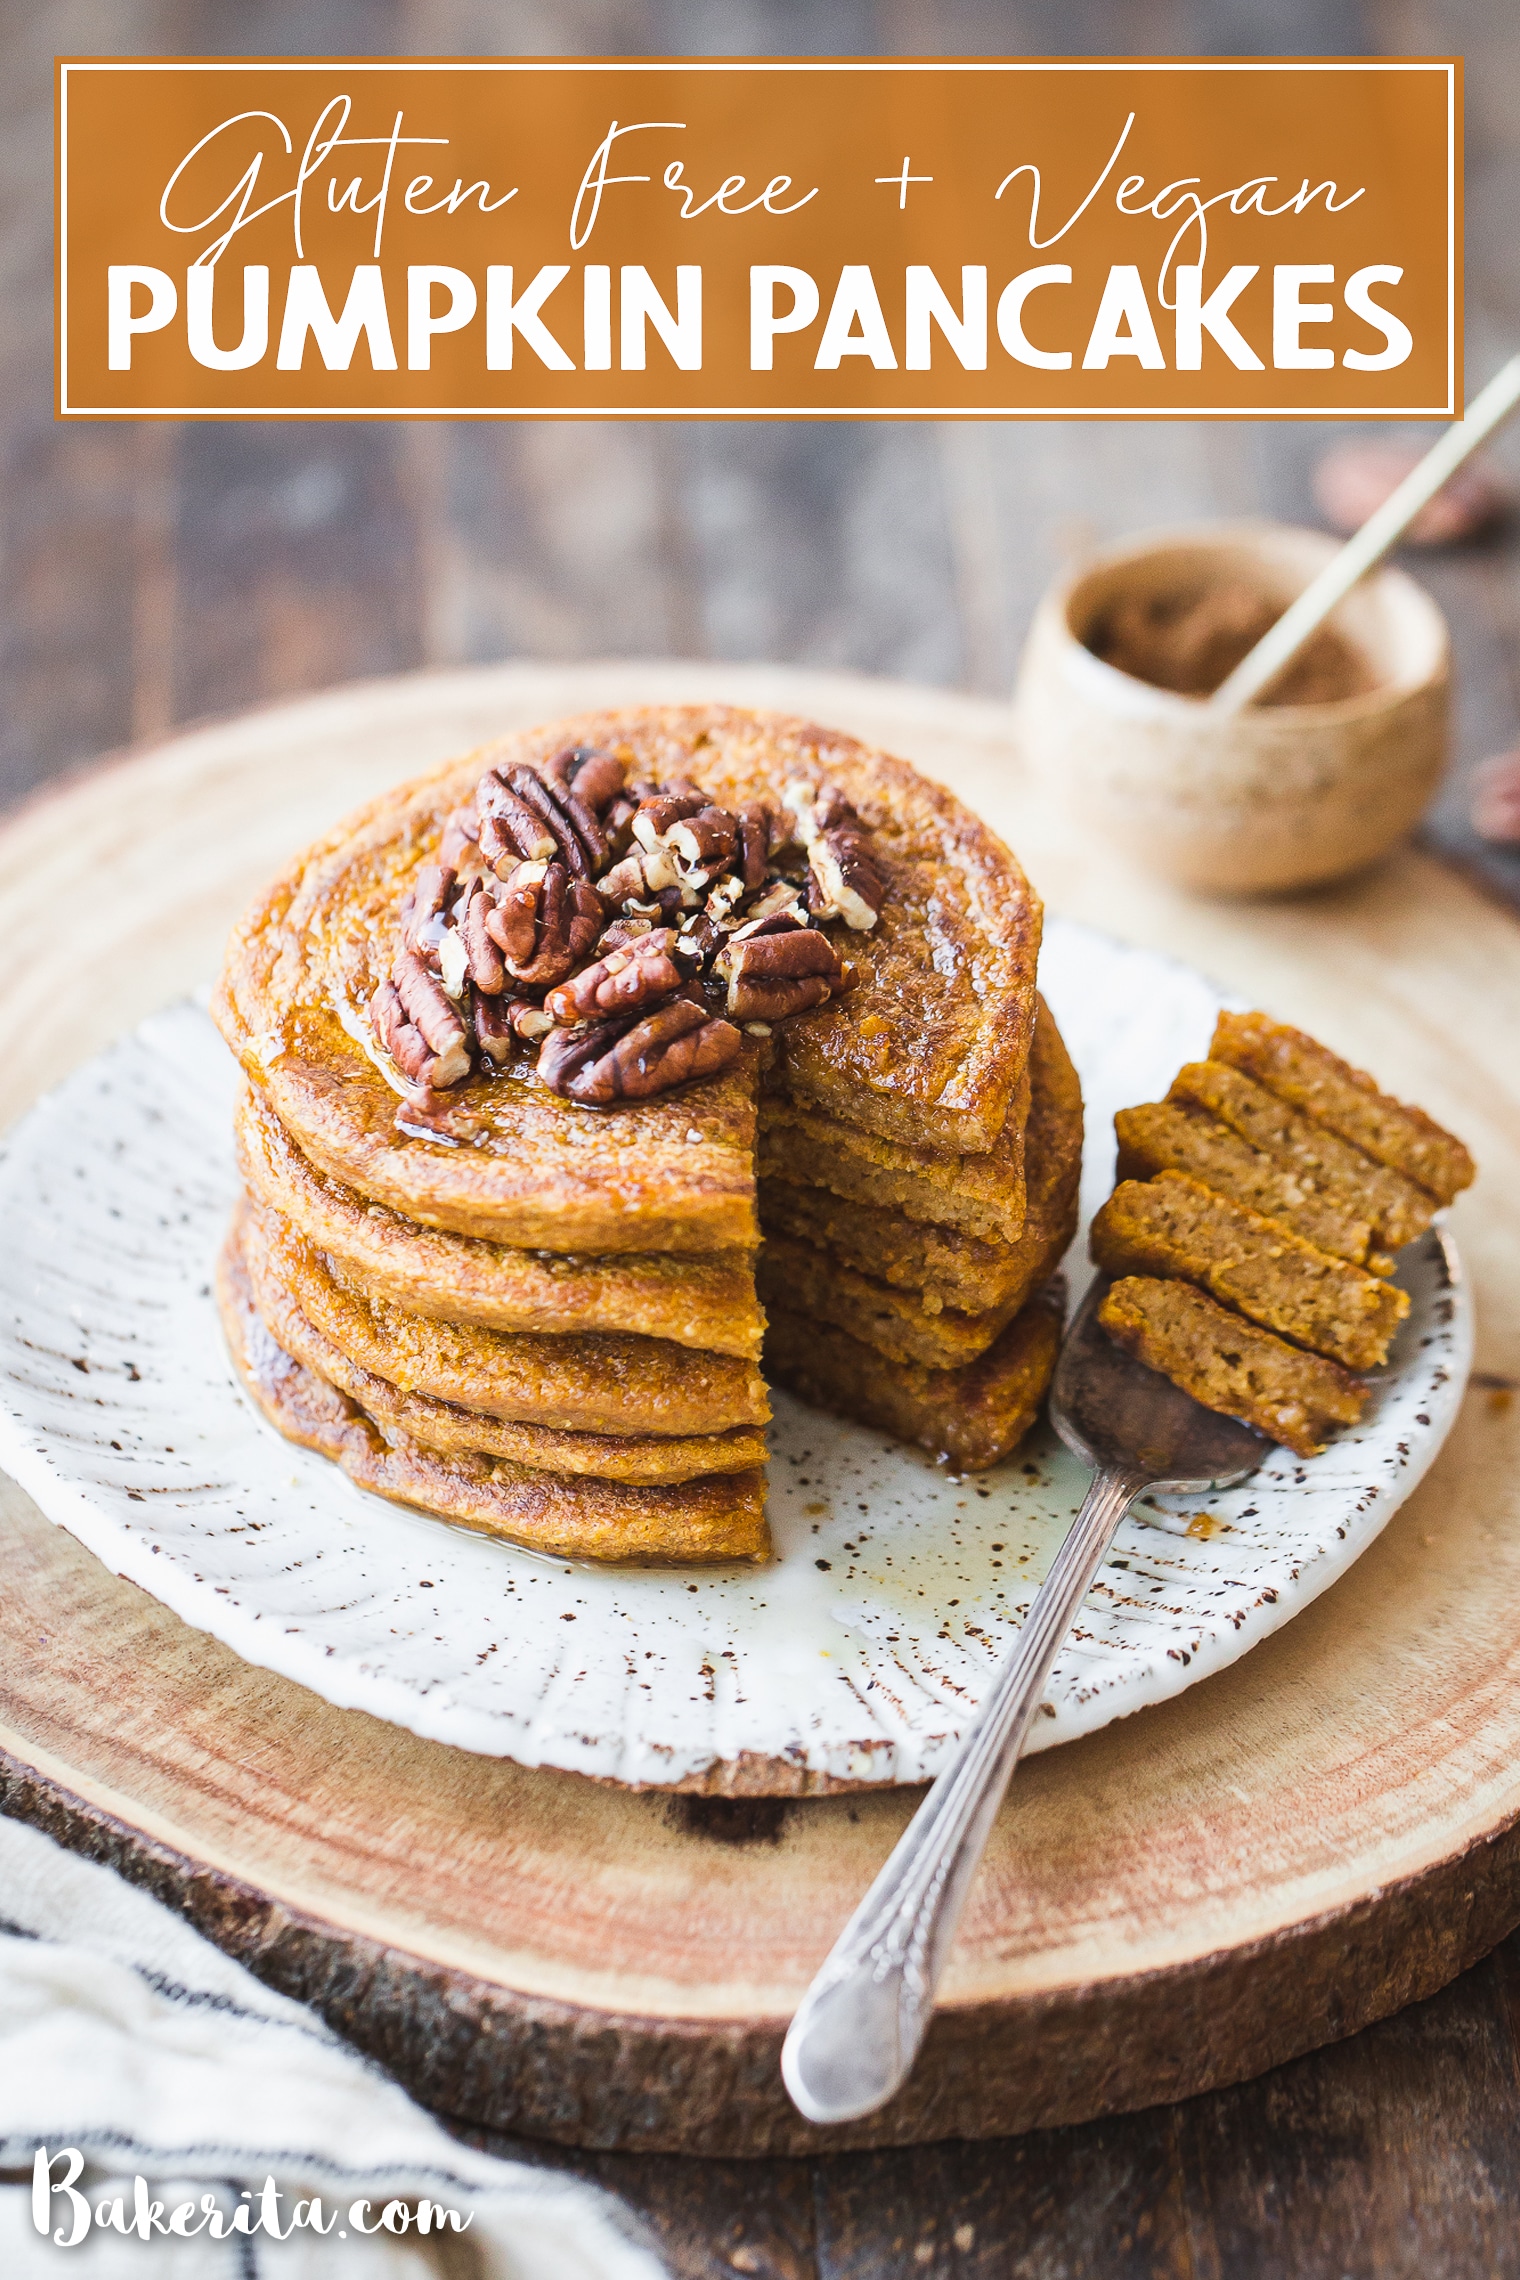 These Gluten-Free Vegan Pumpkin Pancakes tastes like fall thanks to the warm pumpkin spices and maple syrup! They're easy-to-make, light, fluffy, and absolutely delicious. 